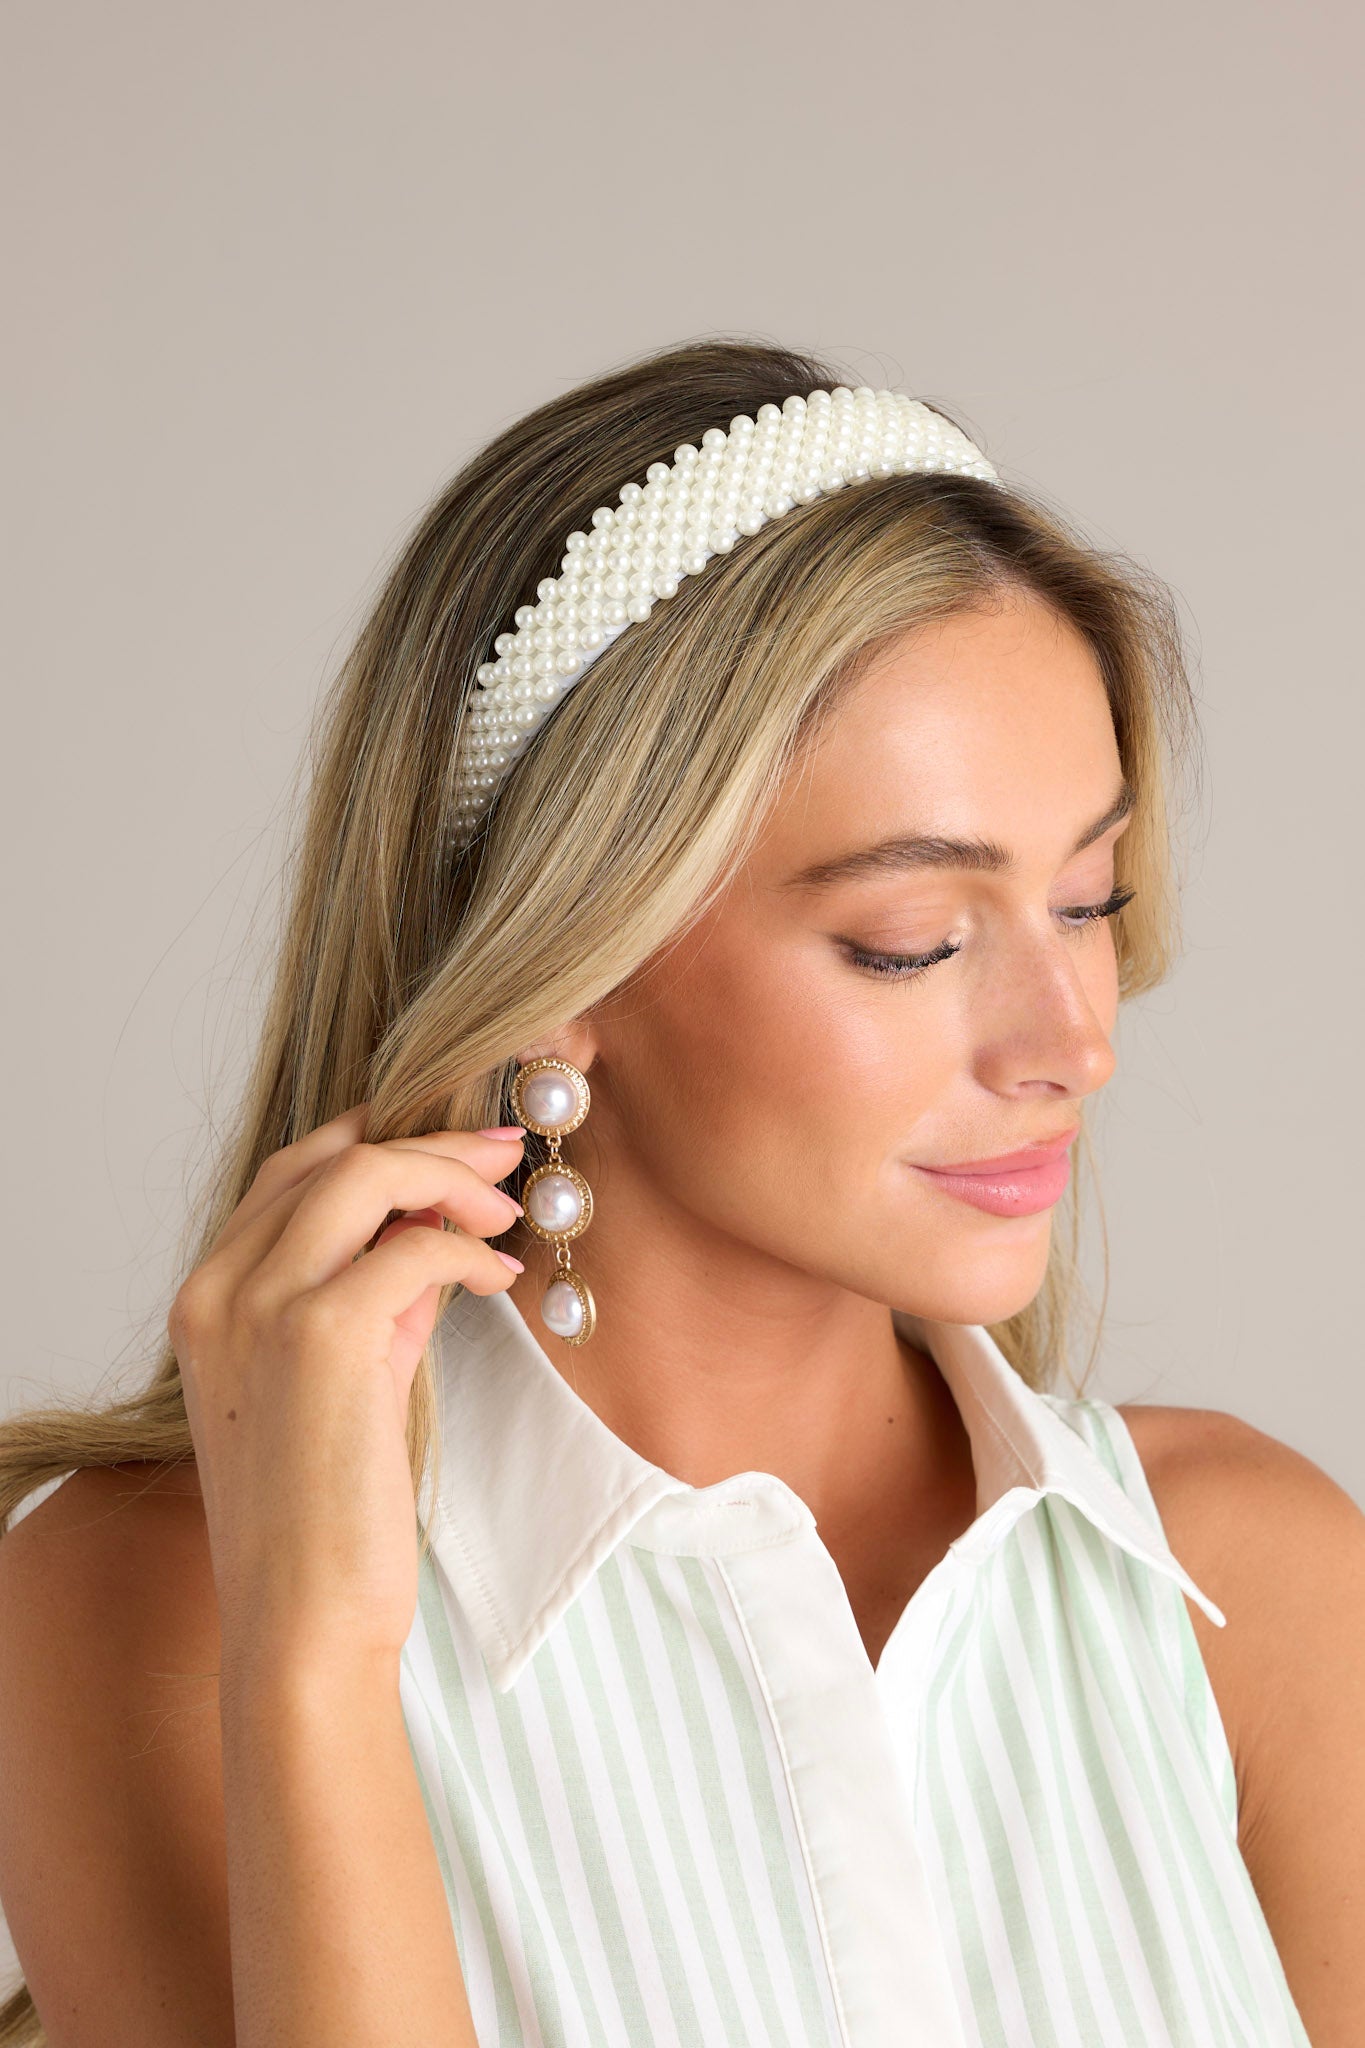 This pearl headband features a flexible design with pearl embellishments throughout.